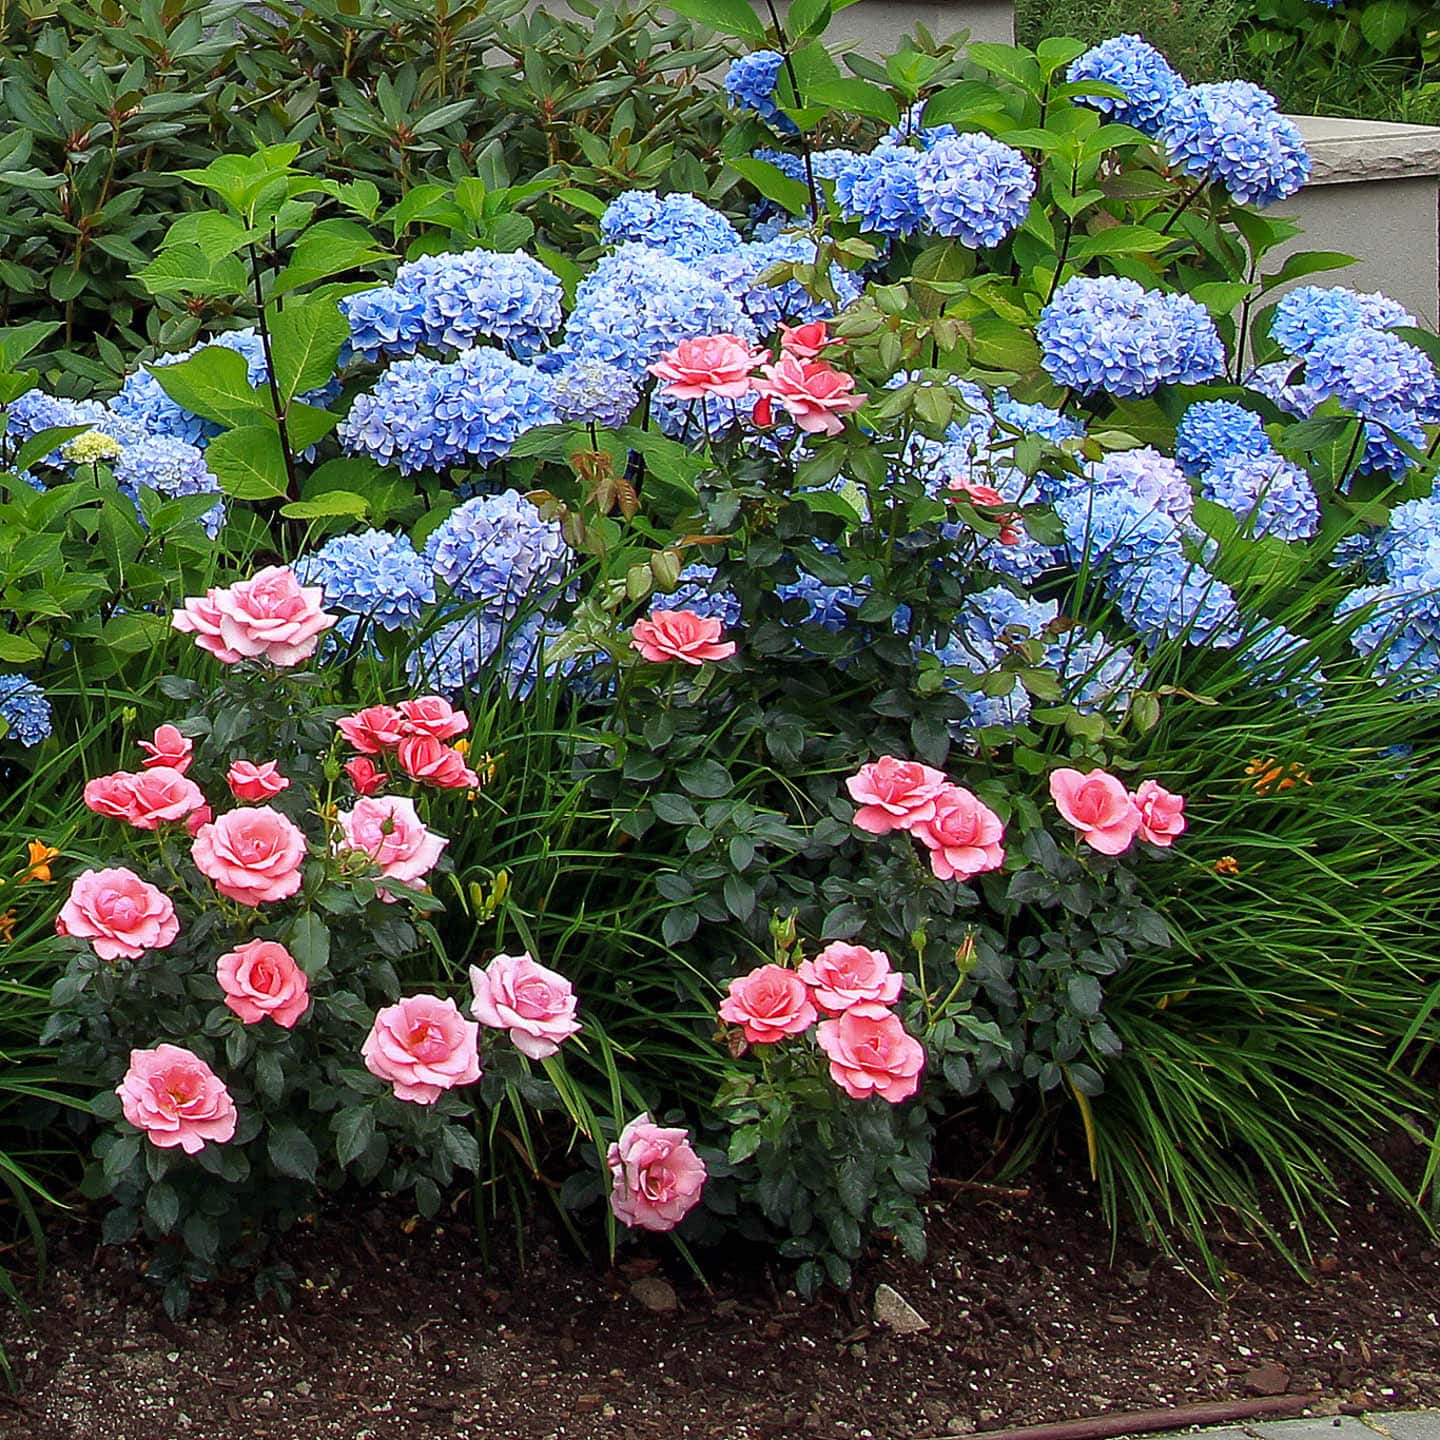 Blue Hydrangea planted with pink roses and daylilies